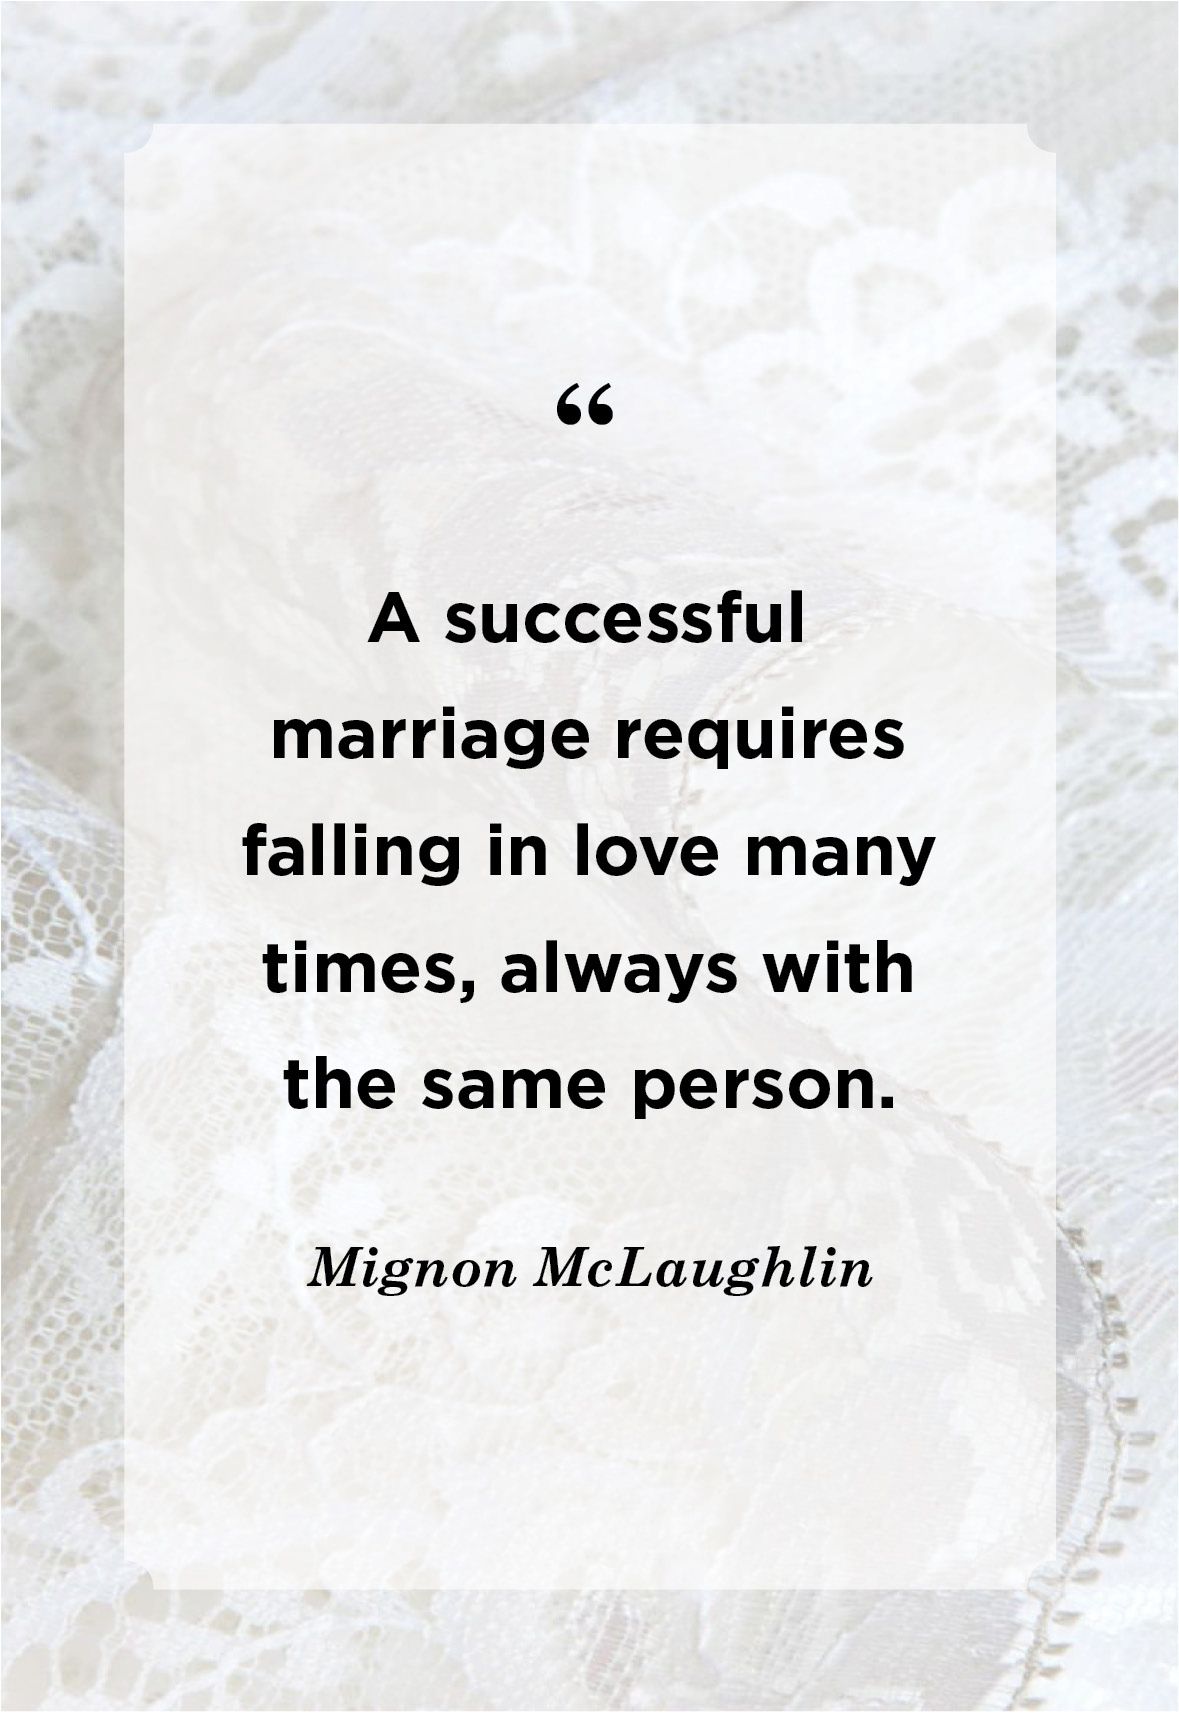 36 Quotes For Your Wedding Day | Giftr - Singapore's Leading Online Gift  Shop